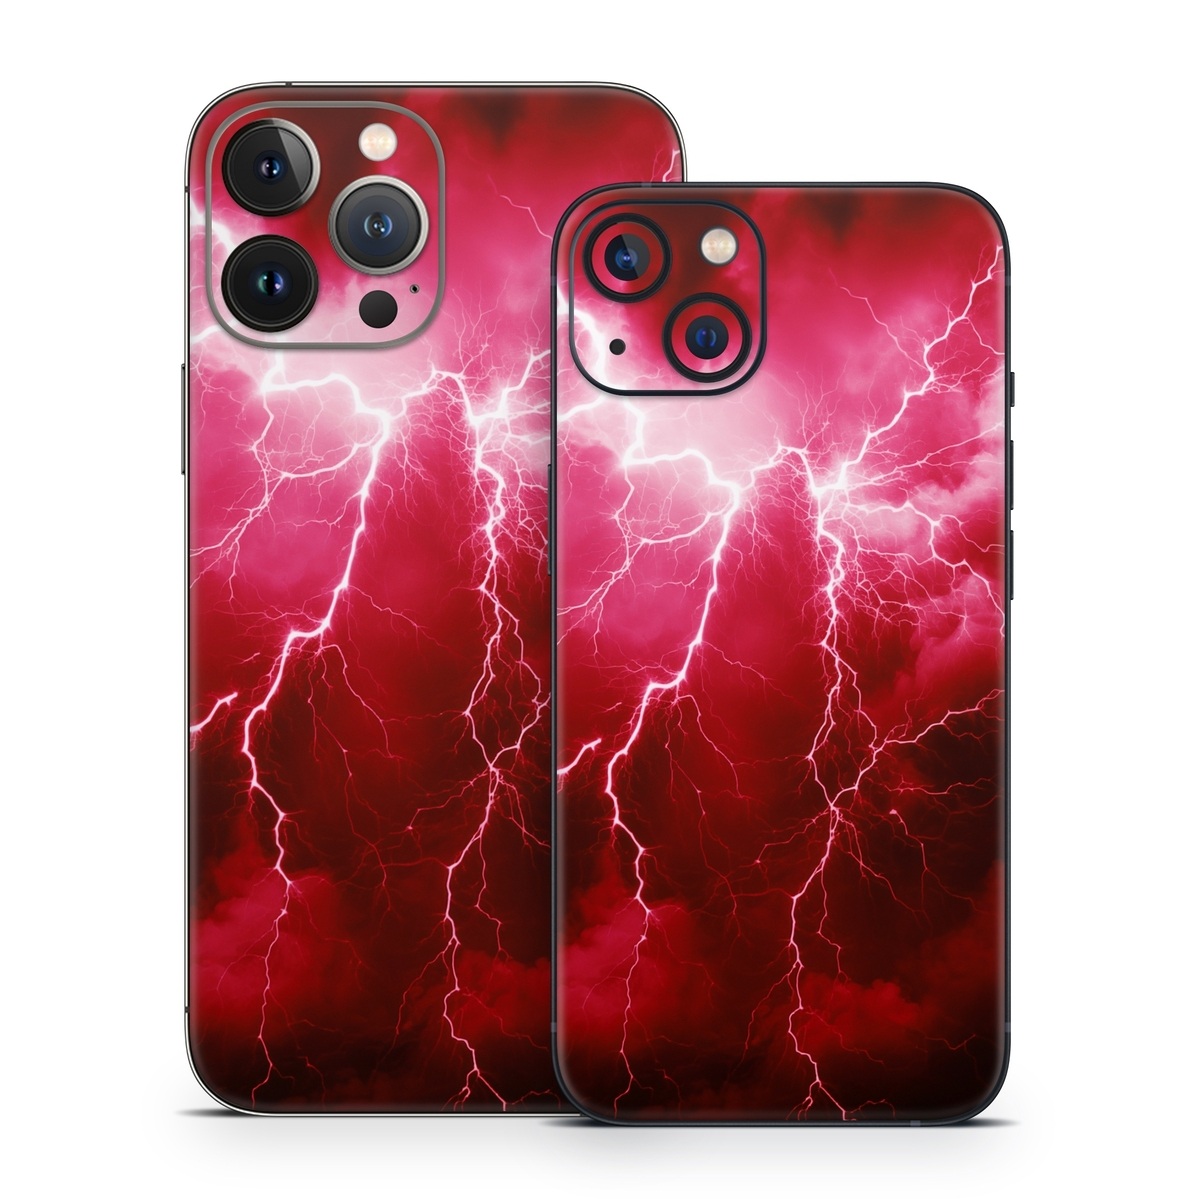 iPhone 13 Series Skin design of Thunder, Atmosphere, Sky, Light, Purple, Lighting, Water, Thunderstorm, Electricity, Pink, with black, red colors